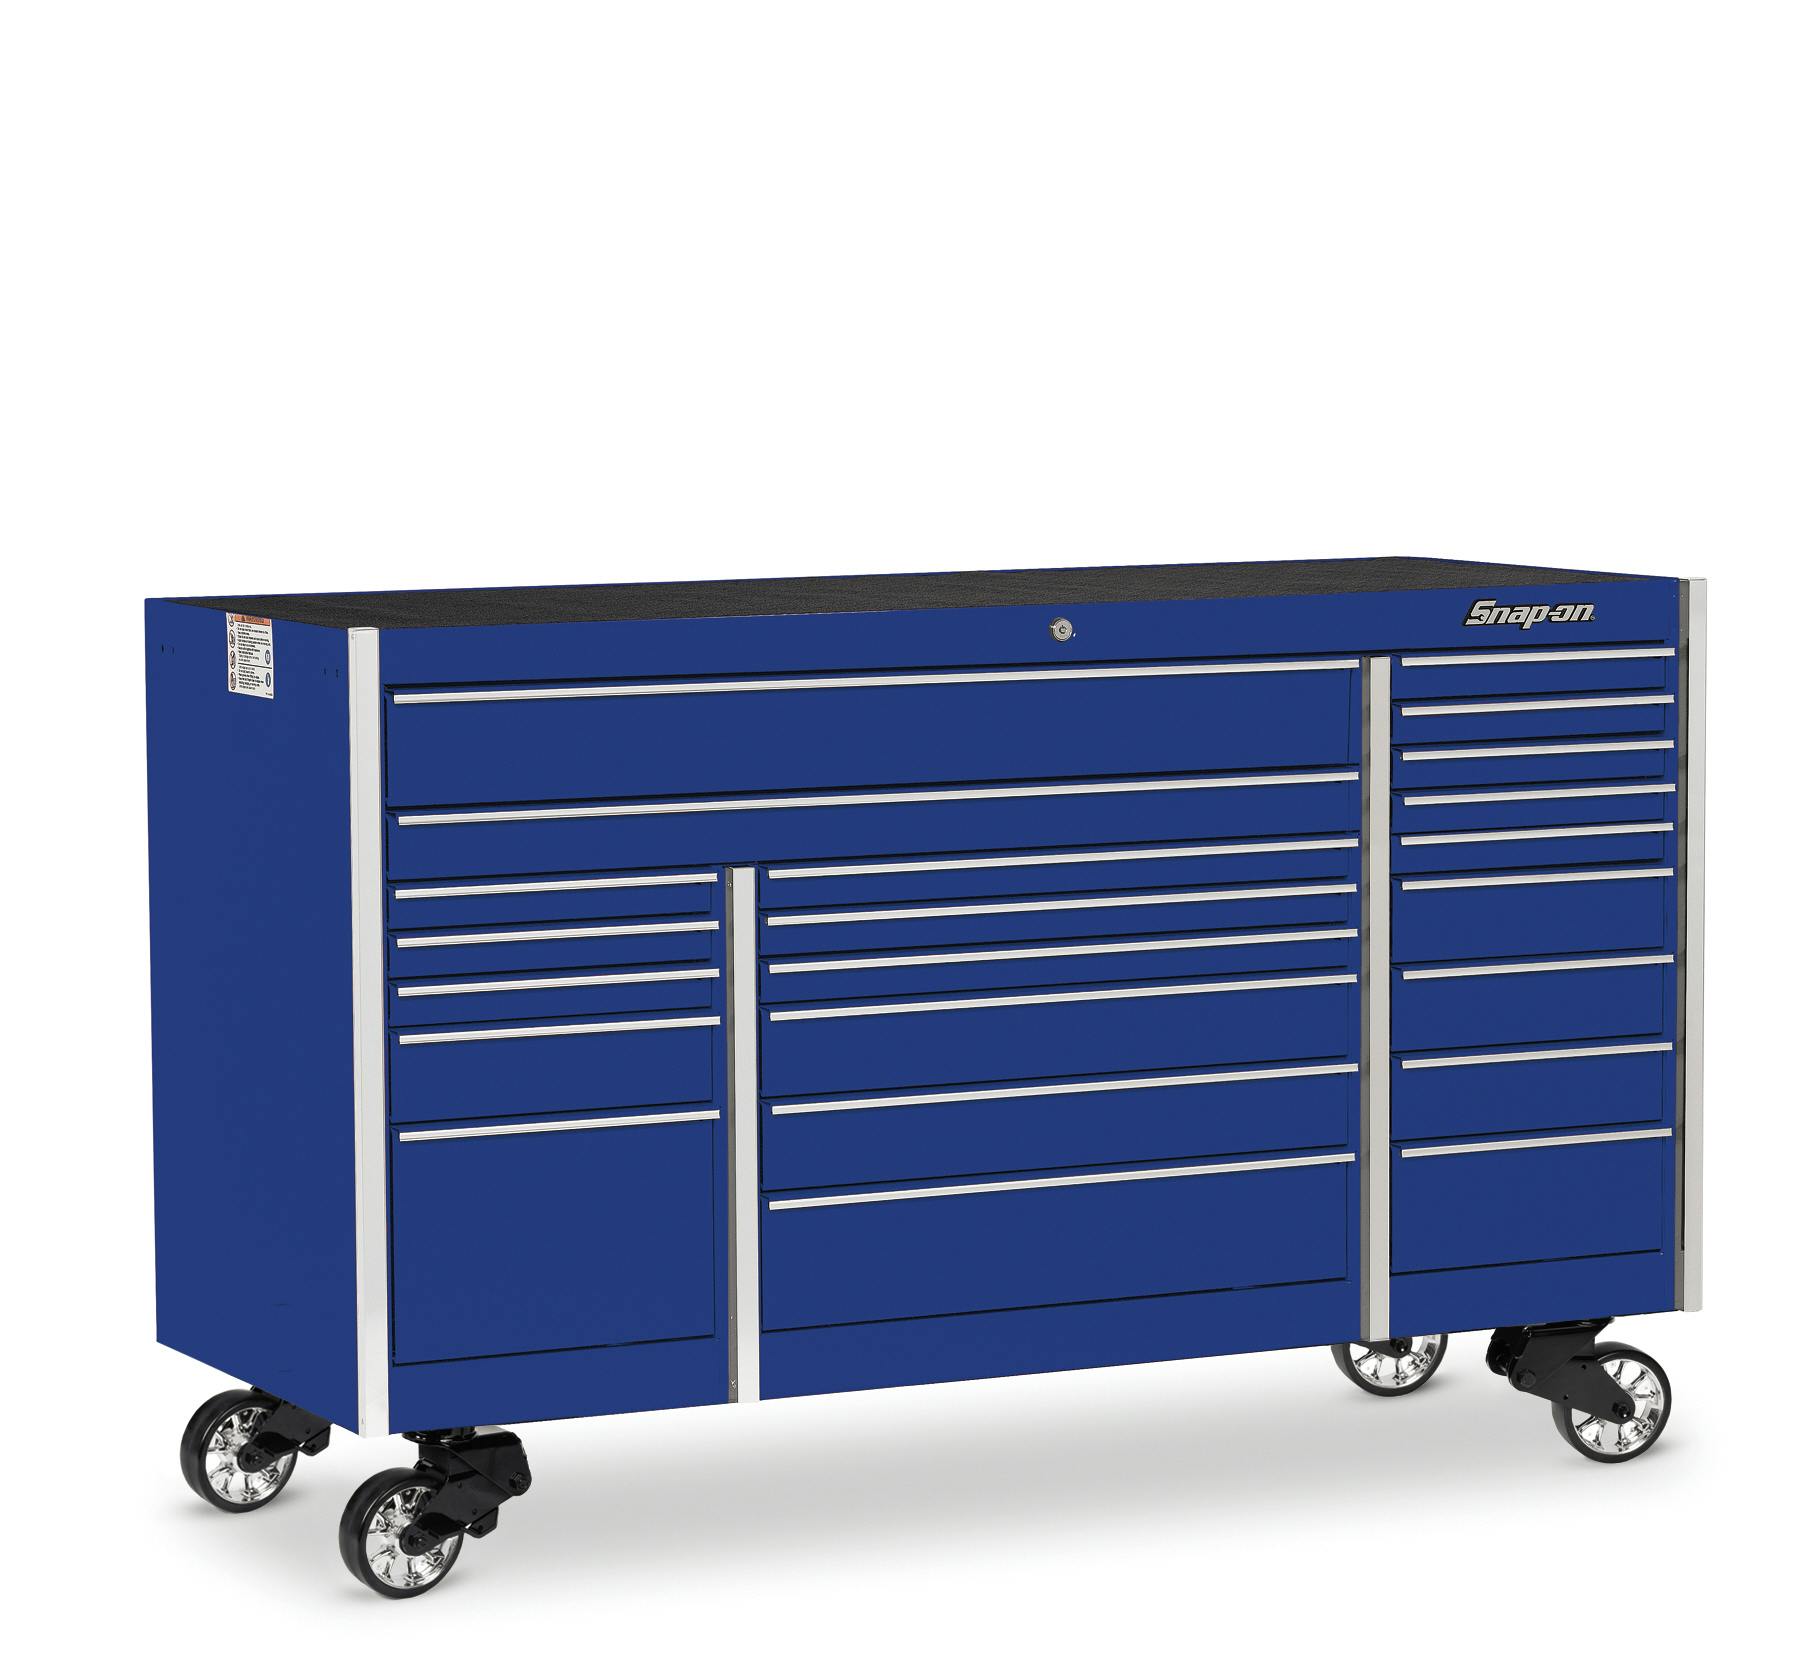 56 in. x 22 in. Roll Cab, Series 3, Blue